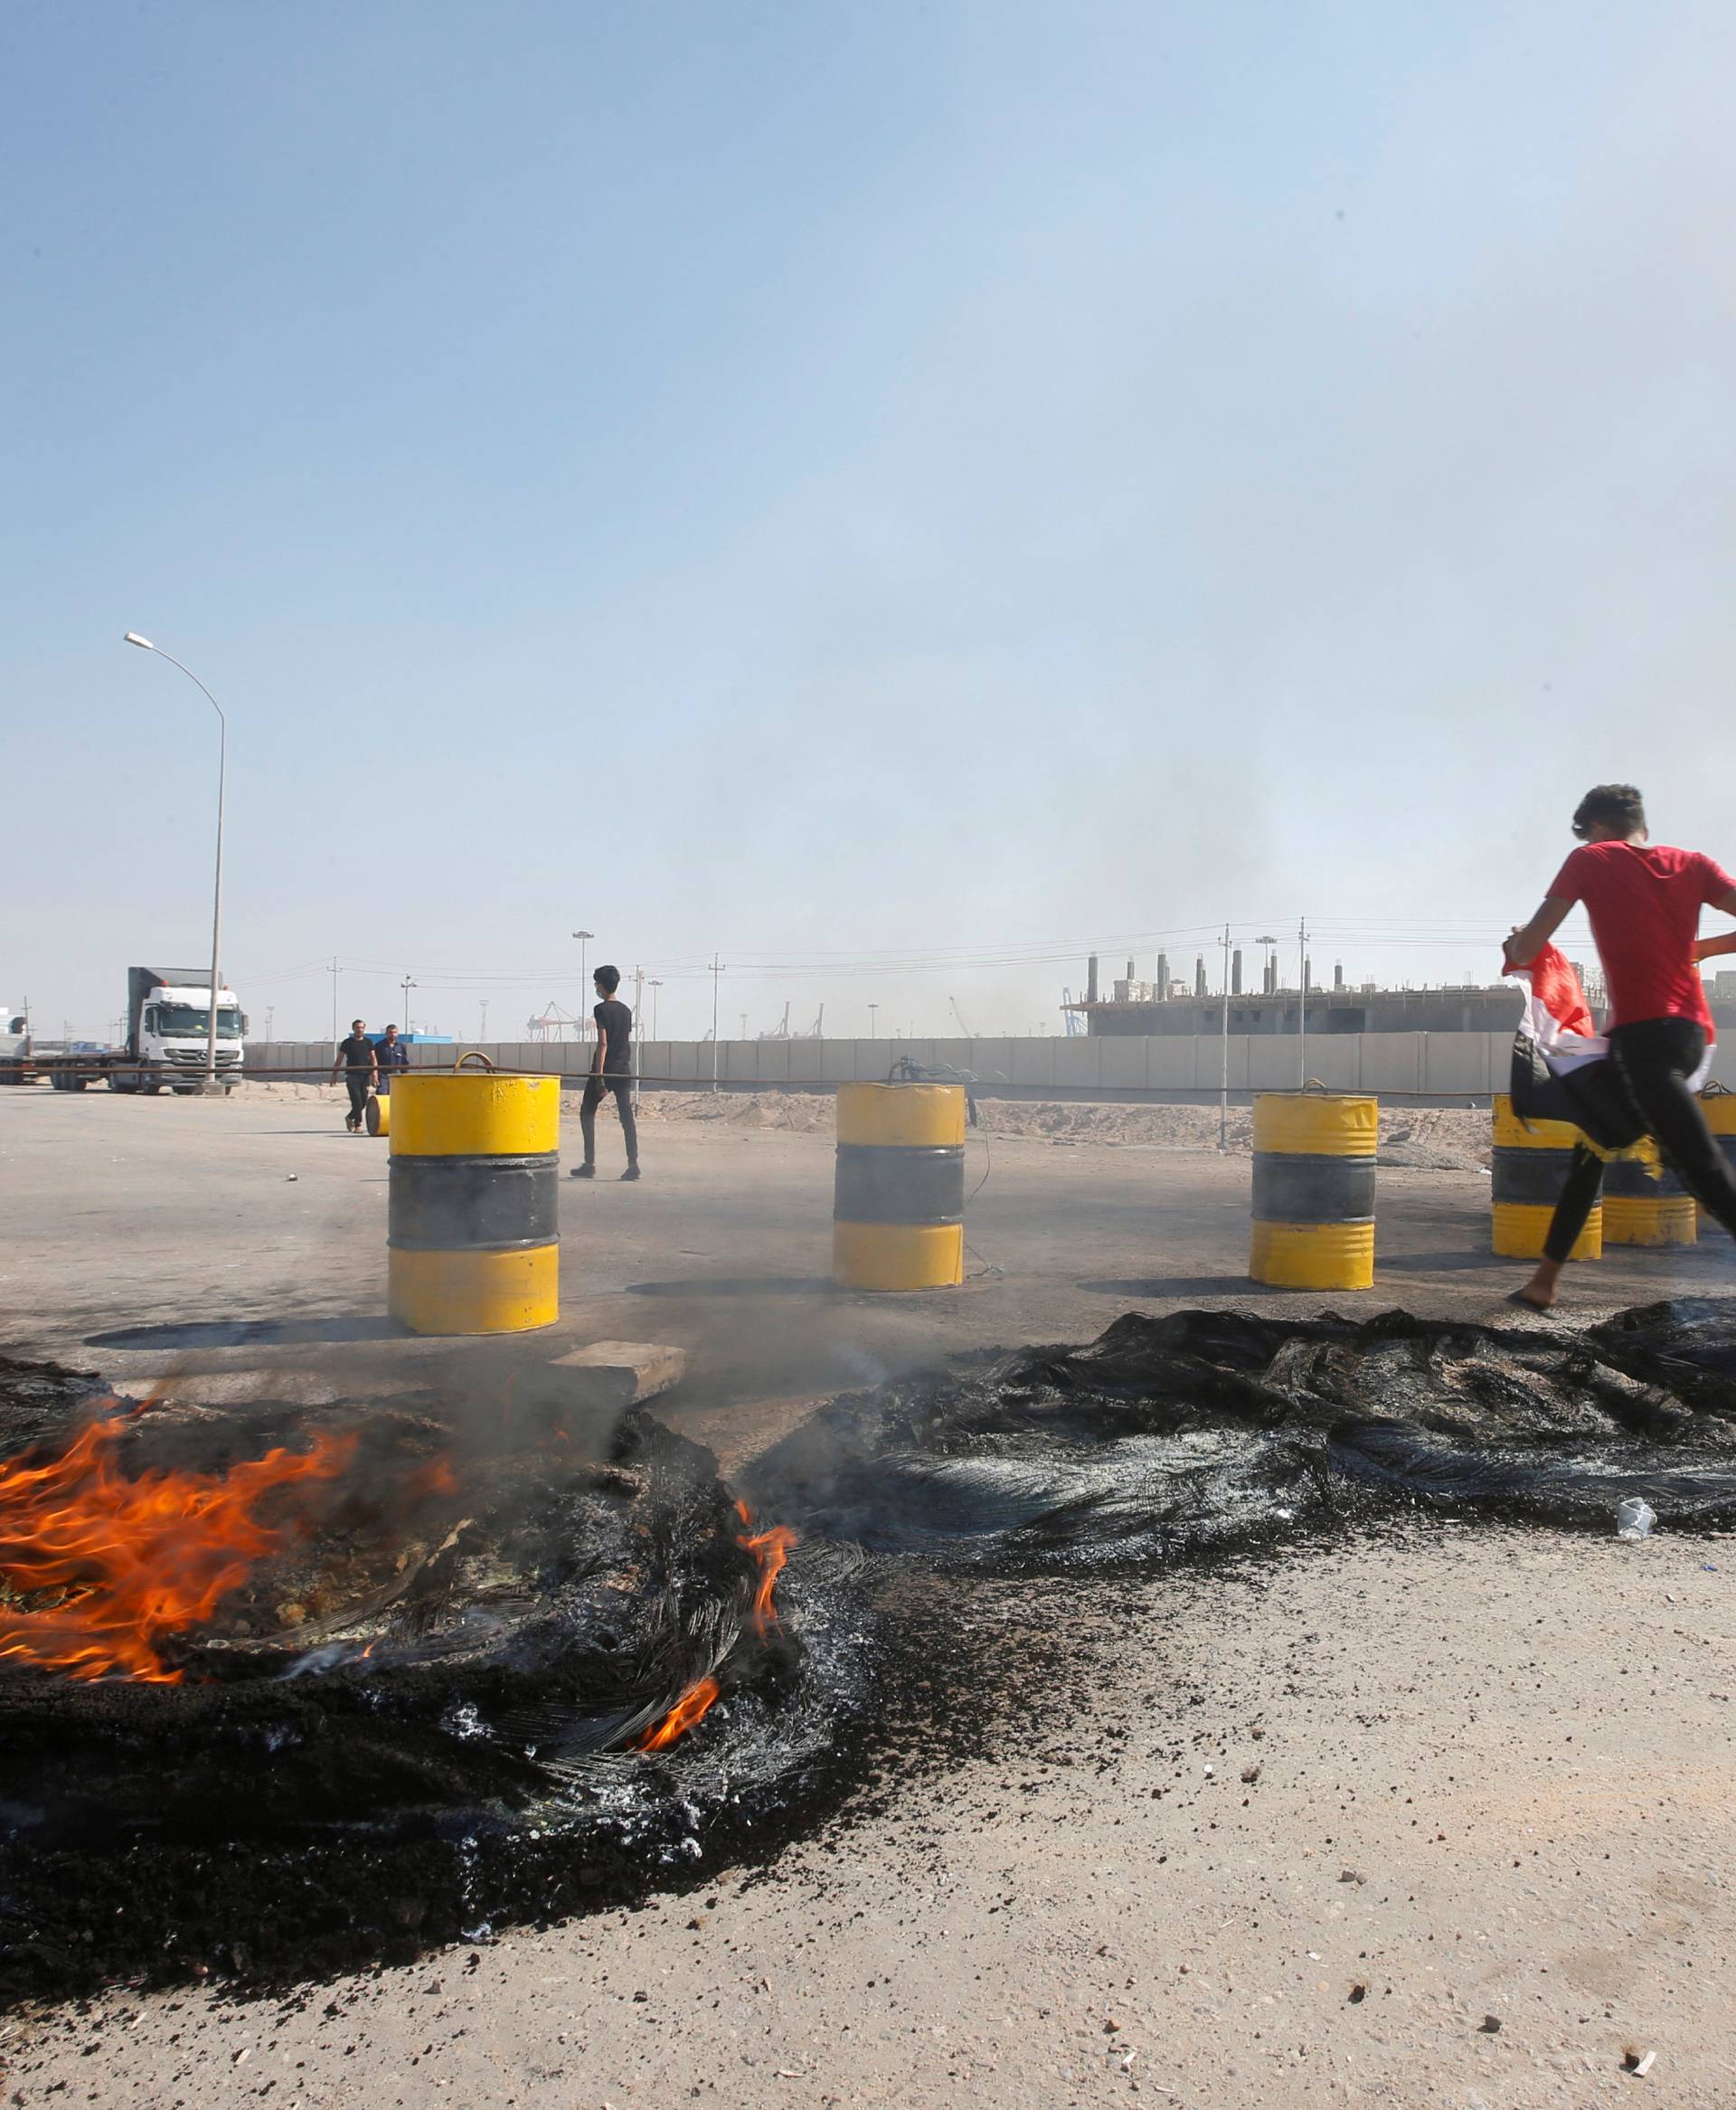 Iraqi protesters burn tires as they block the entrance of Umm Qasr Port south of Basra